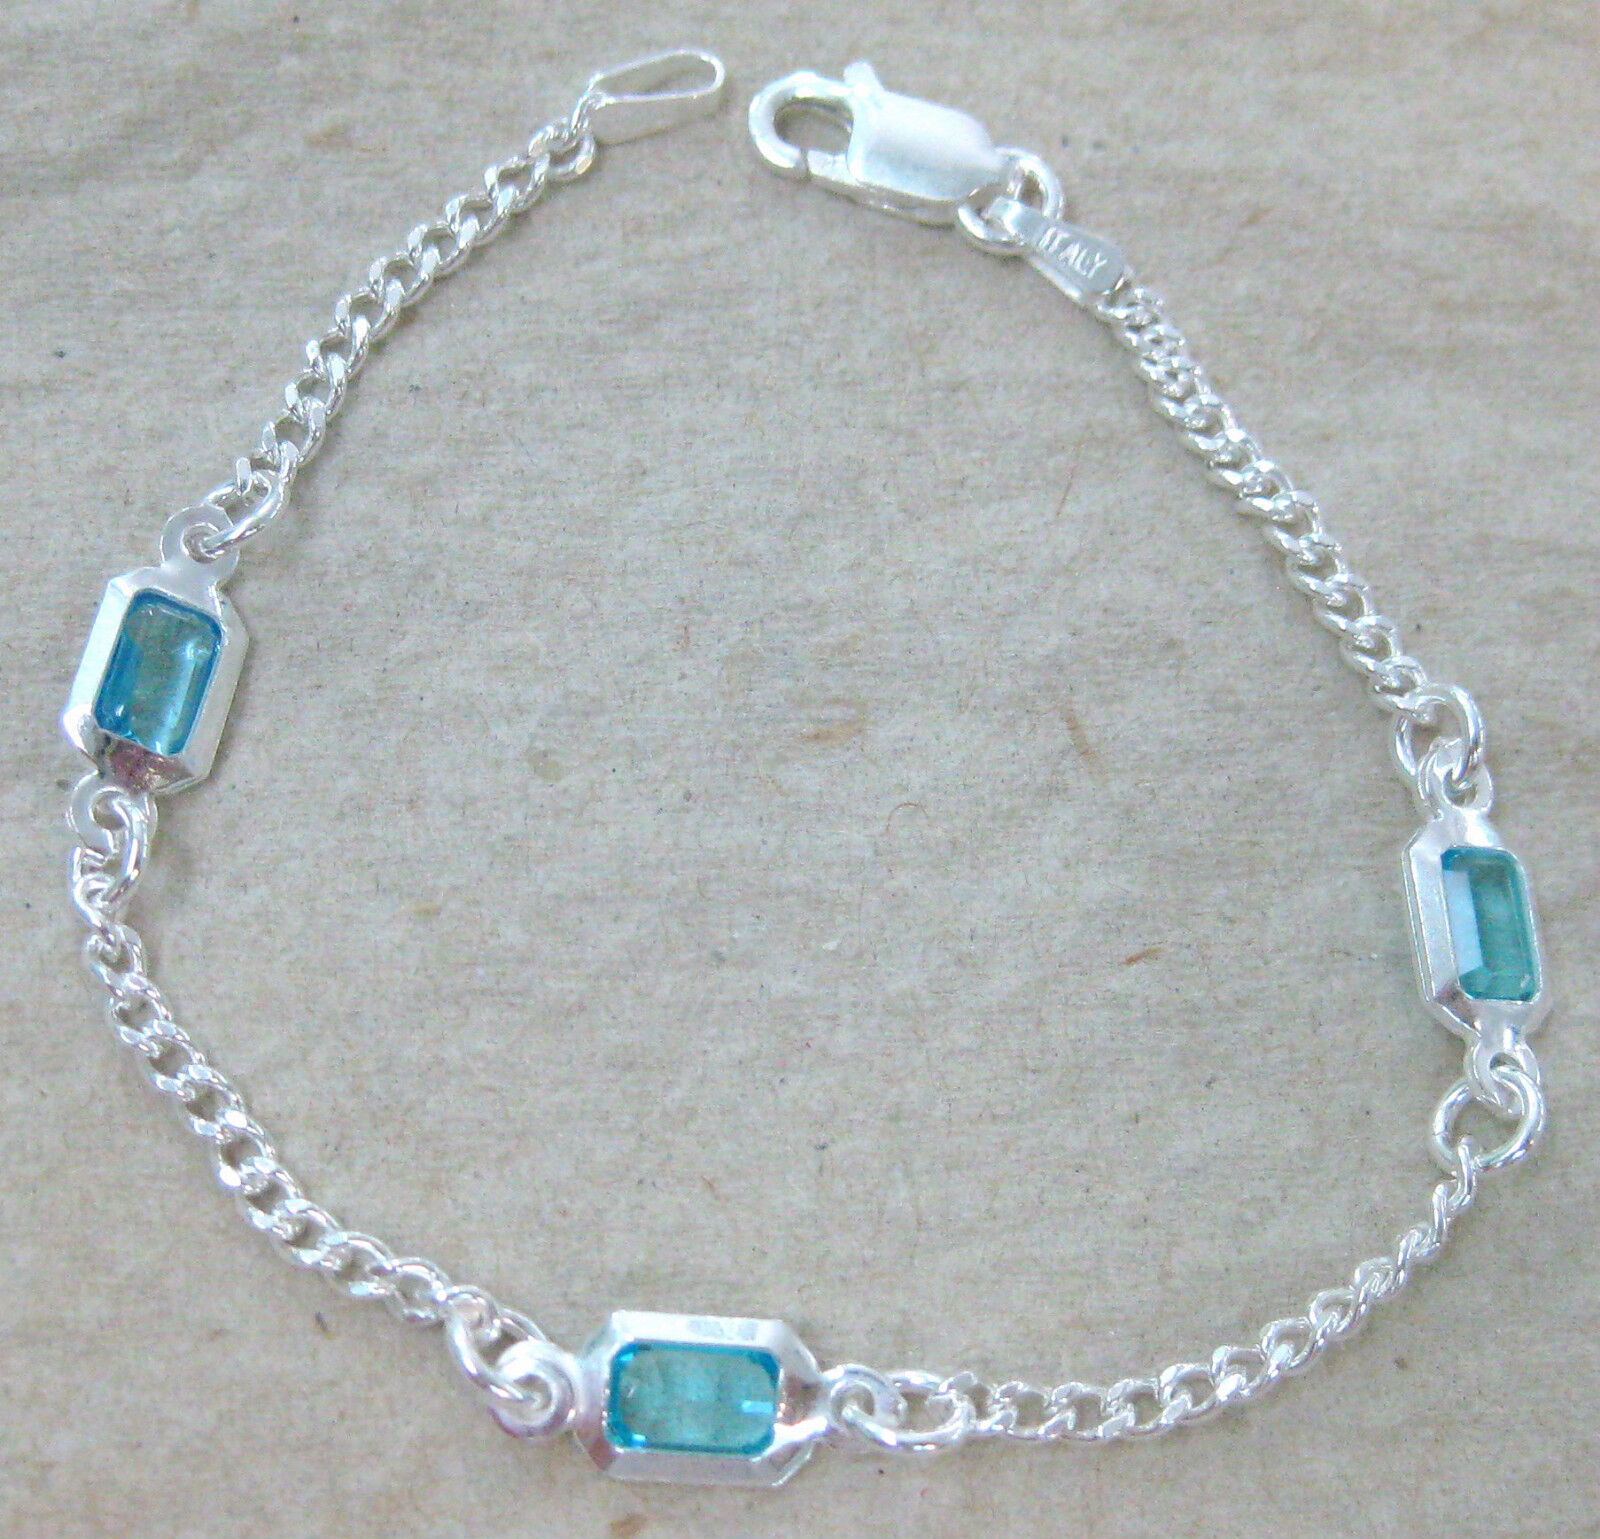 MADE IN ITALY 925 STERLING SILVER rectangle BLUE cz 13.5cm to 24cm BRACELET GIRL